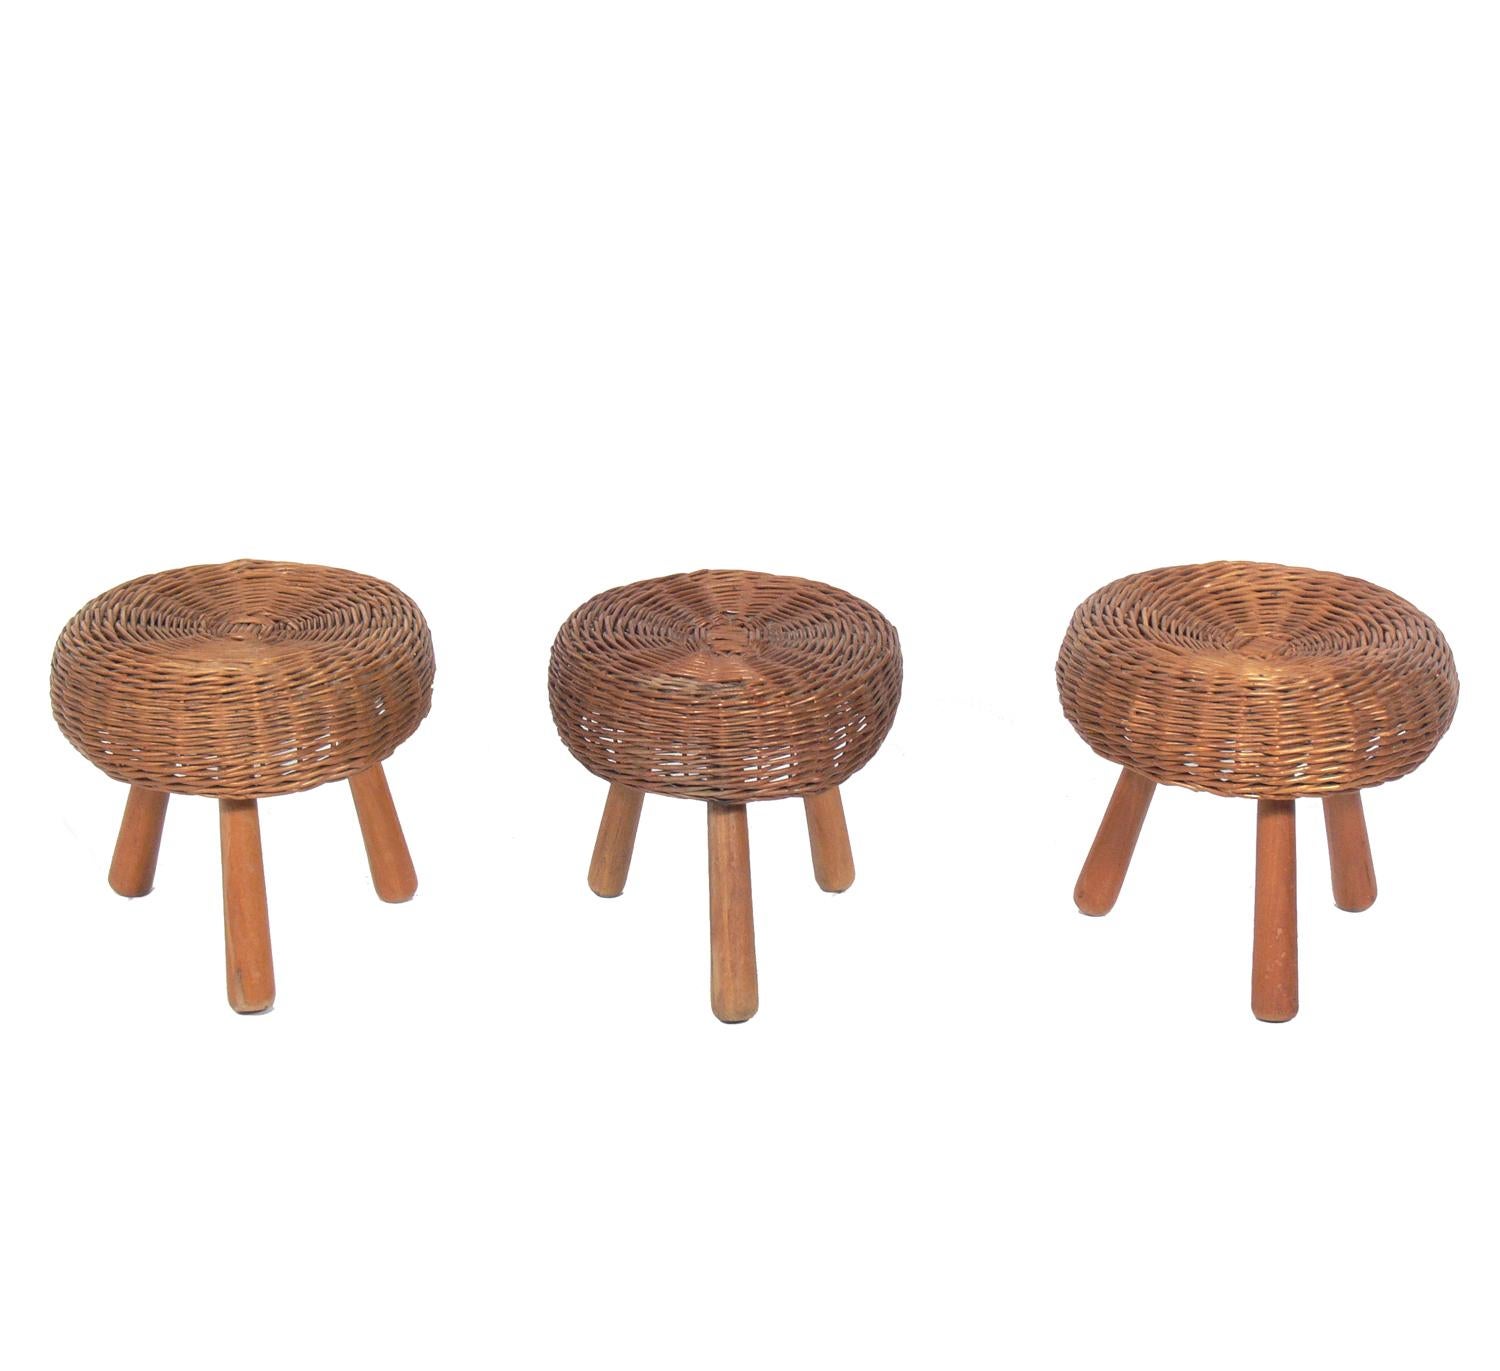 Set of three rattan stools in the manner of Charlotte Perriand, probably French, circa 1950s. They retain their warm original patina.